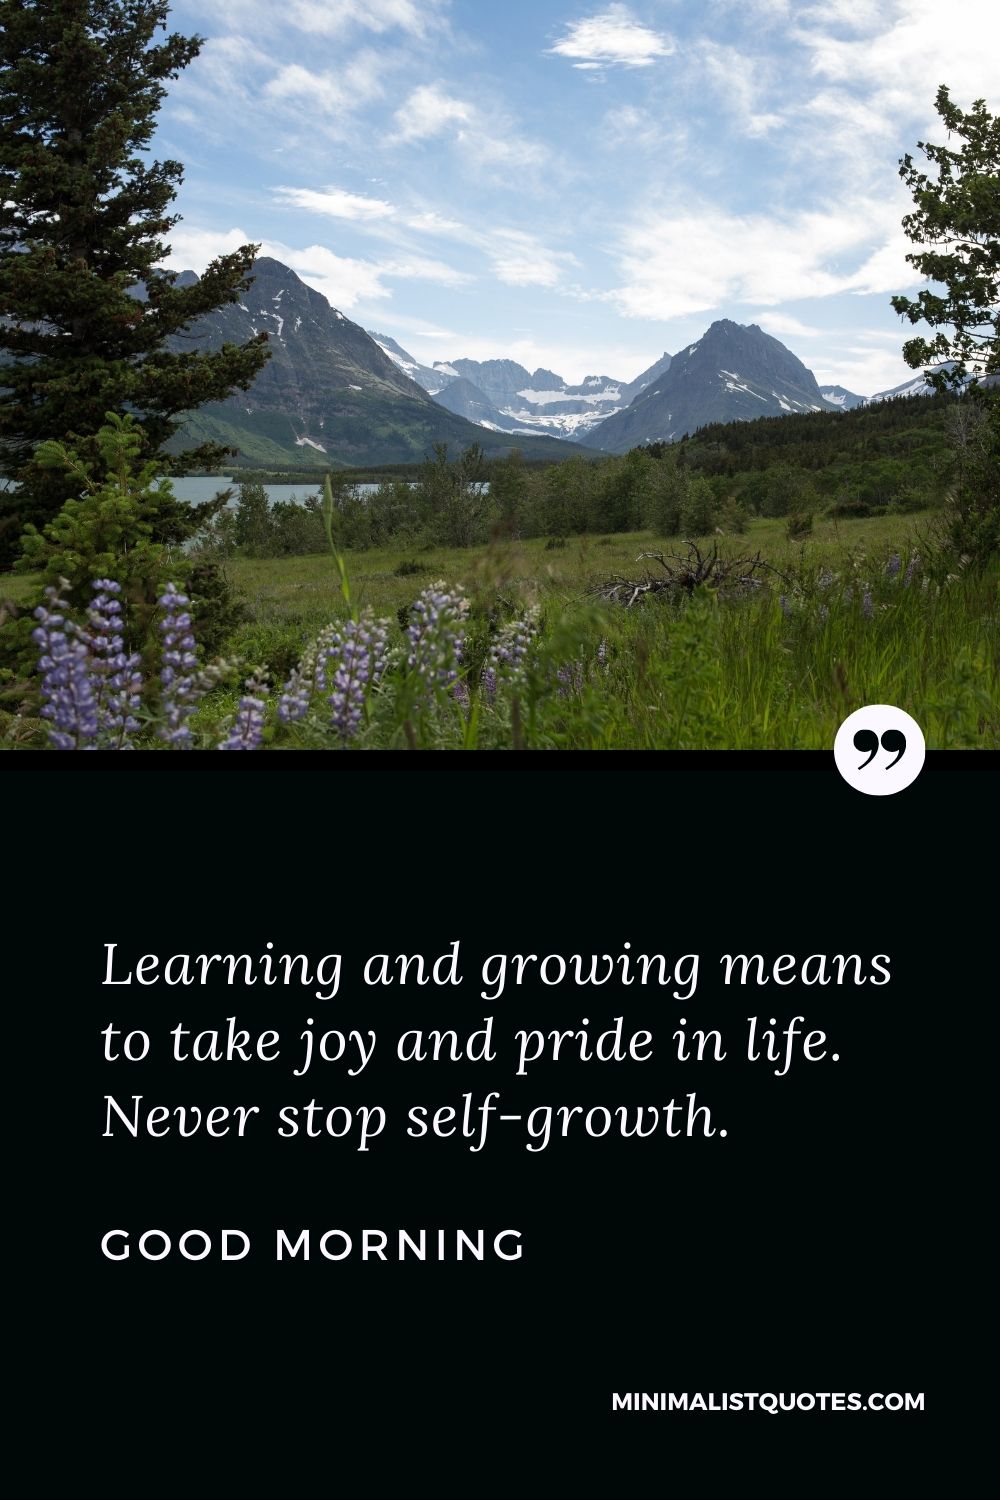 Good Morning Wish & Message With Image: Learning and growing means to take joy and pride in life. Never stop self-growth.